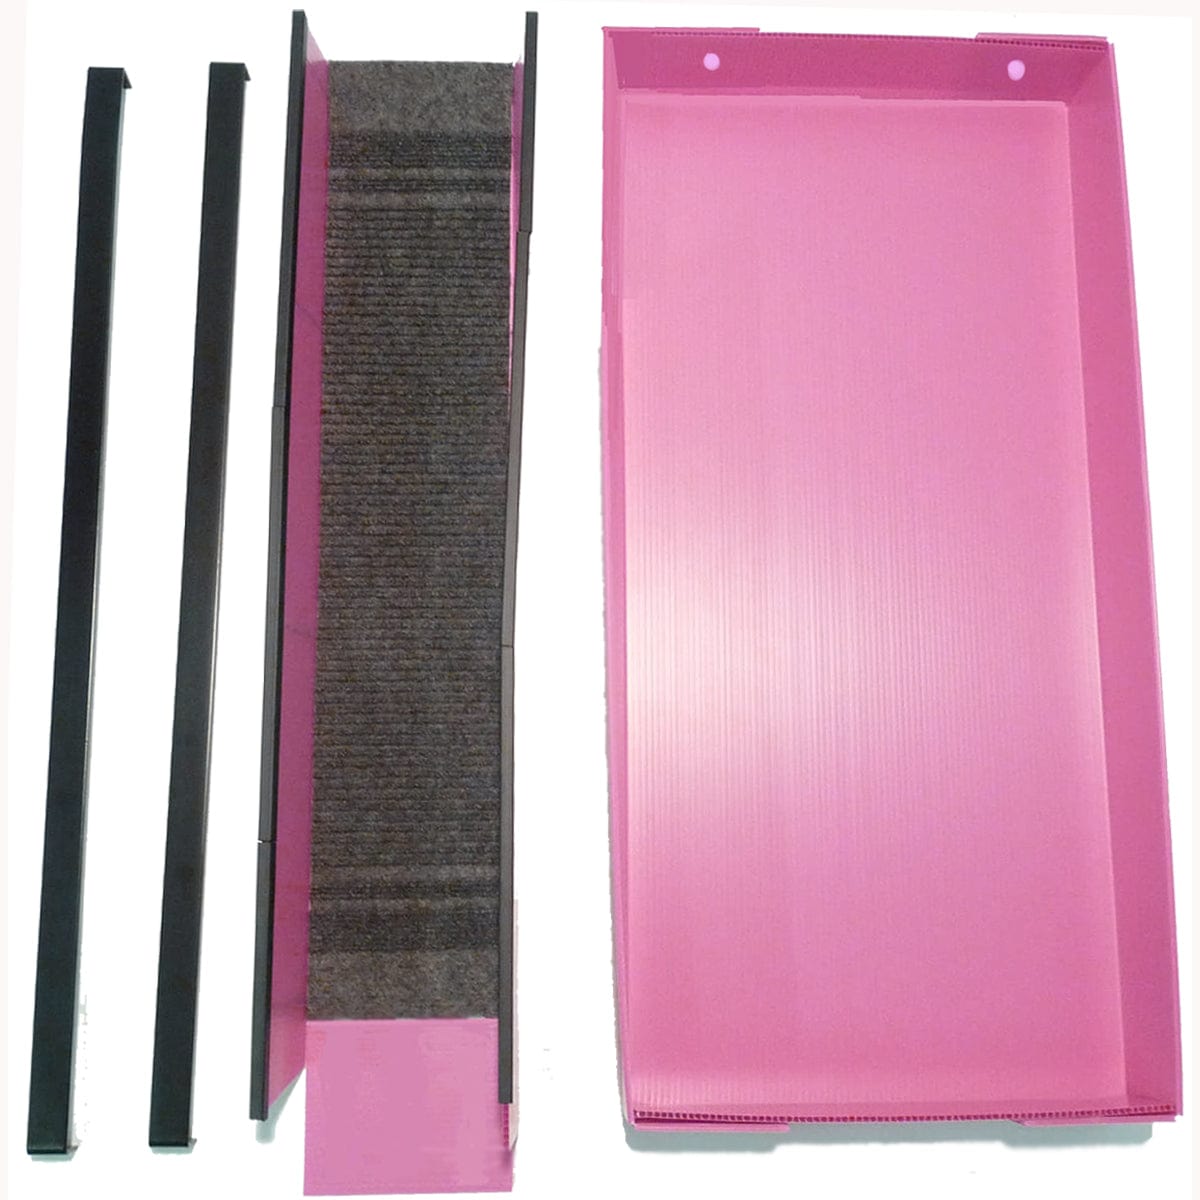 all of the components that make up a piggy patio in the color pink